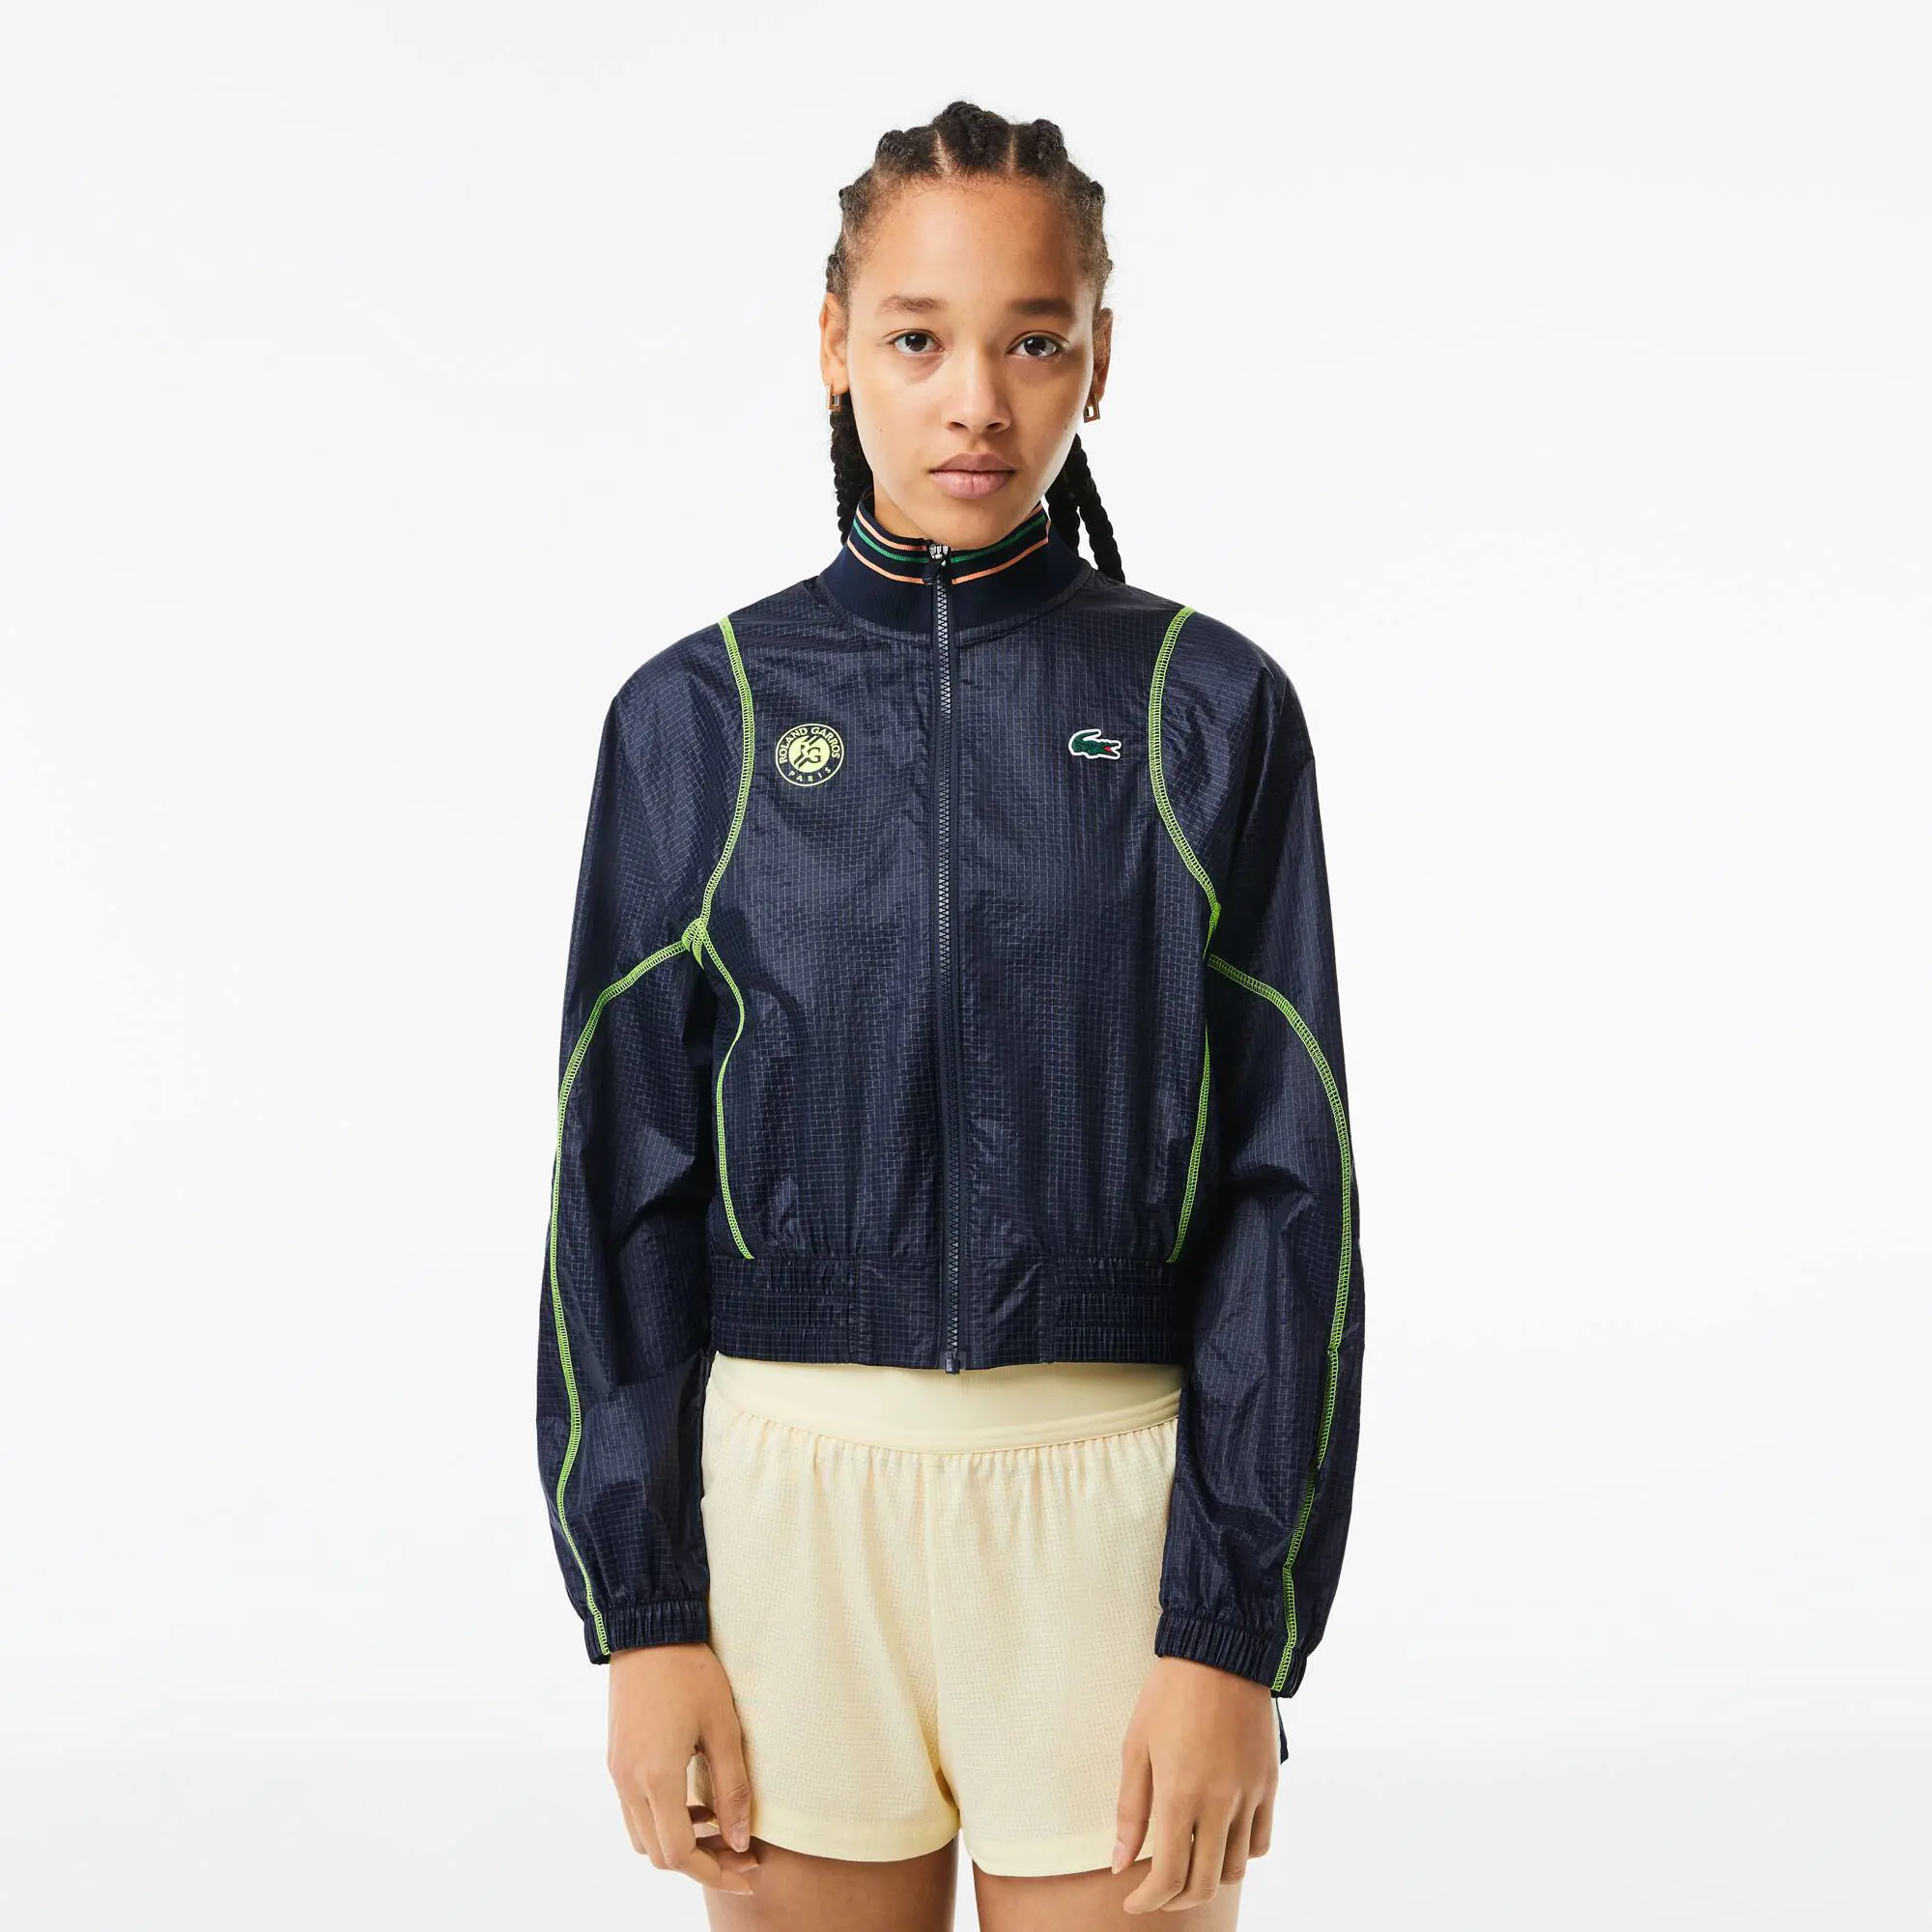 Lacoste Women’s Roland Garros Edition Post-Match Cropped Jacket. 1